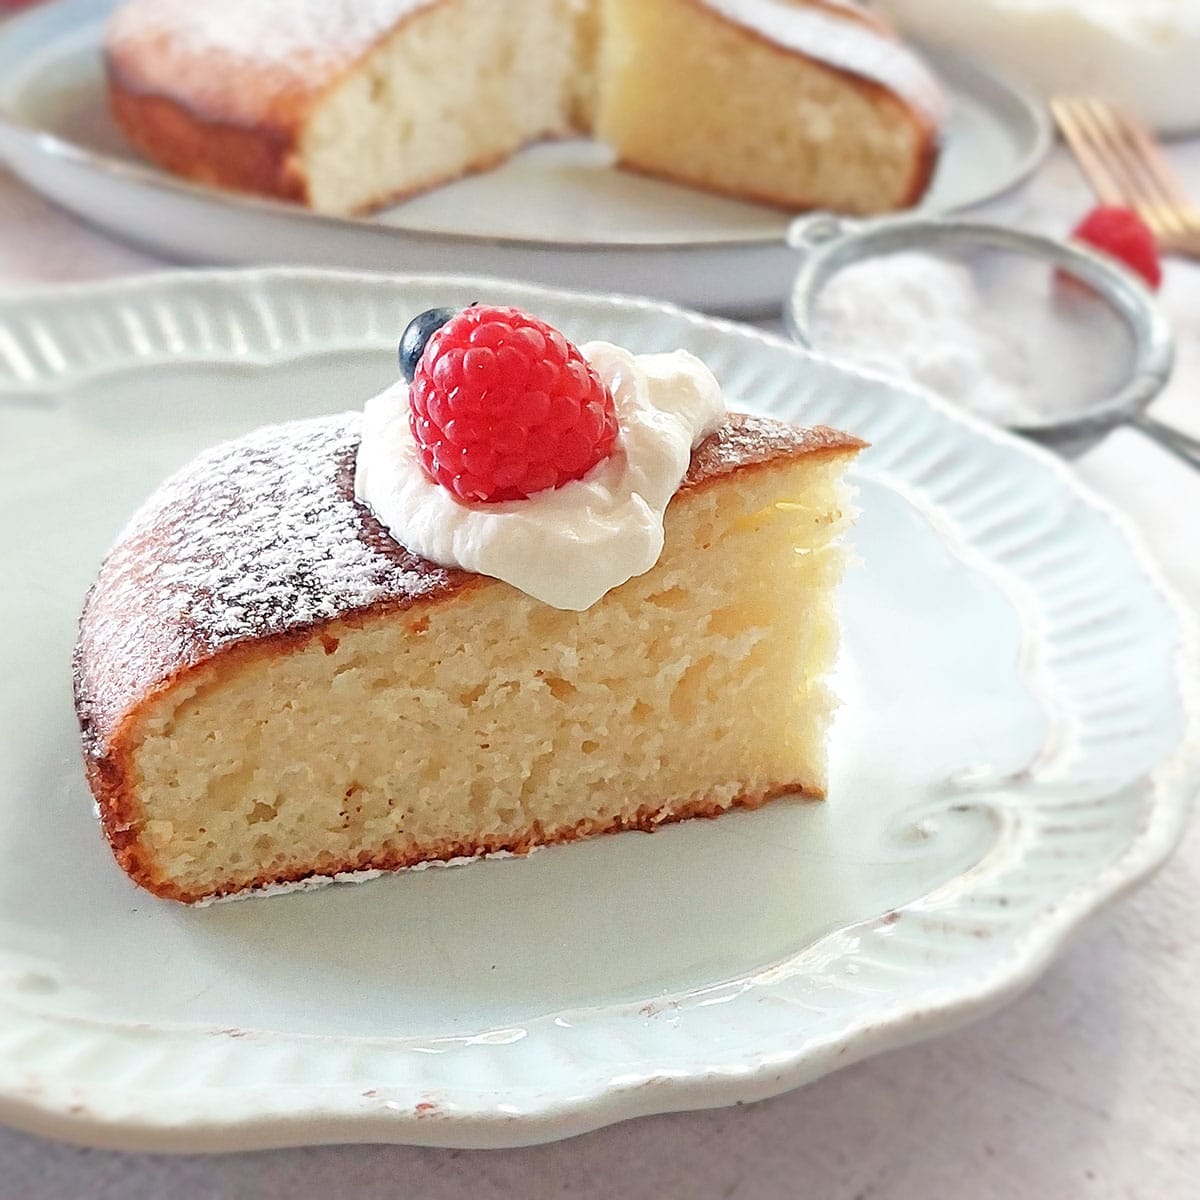 French yogurt cake is a perfect base for birthday cakes, celebration cakes, or quick desserts.

